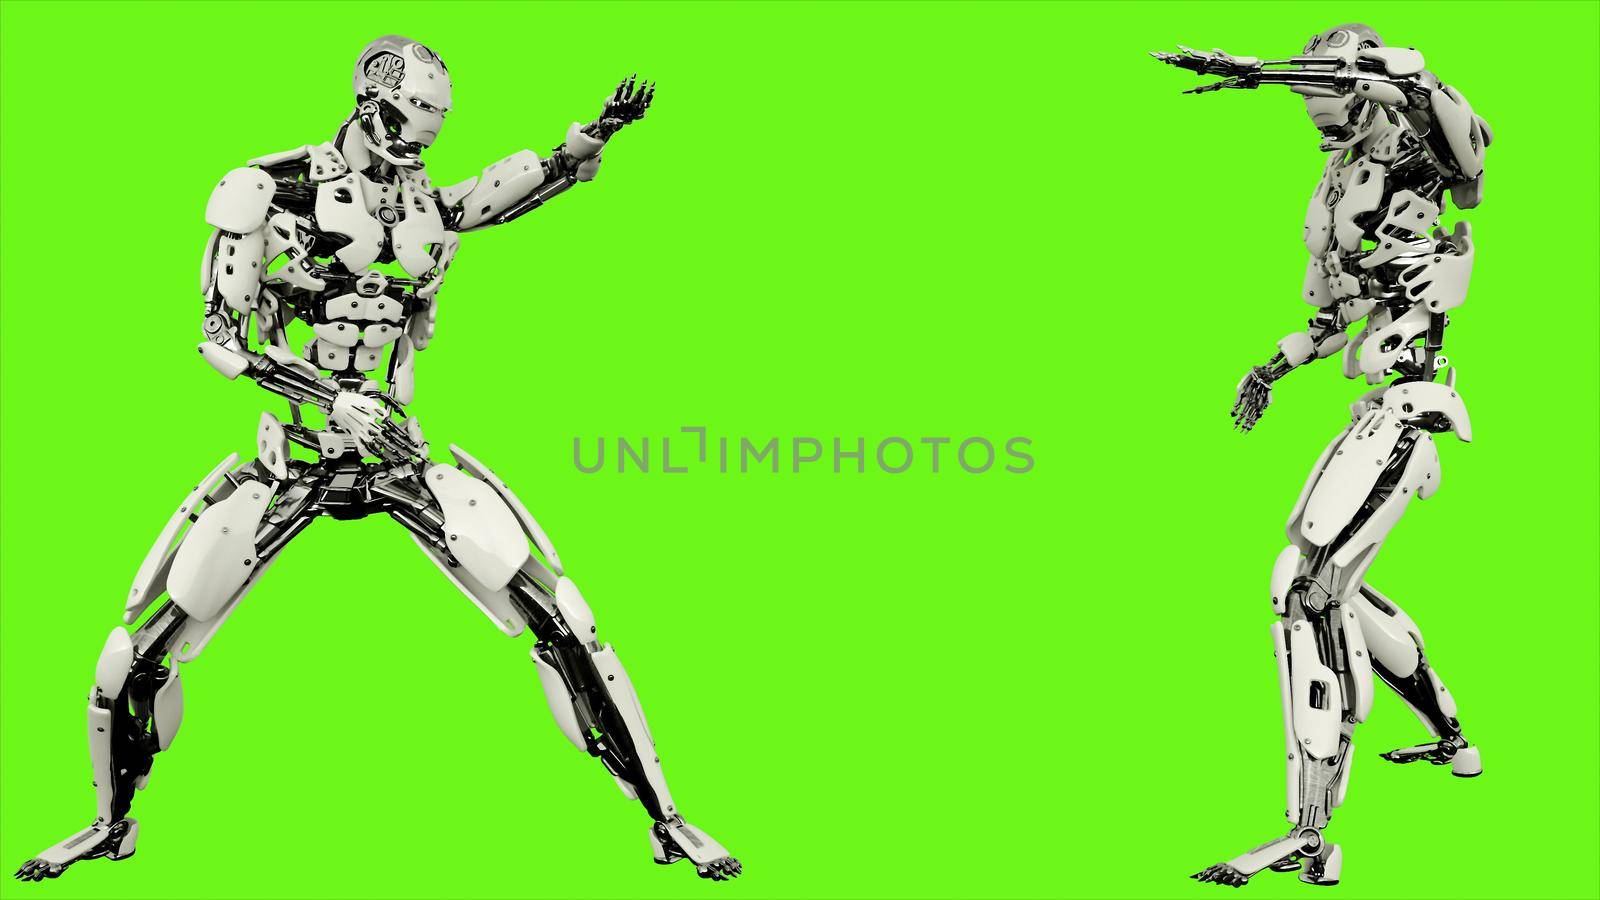 Robot android is shows your fighting skills Illustration on green screen background.